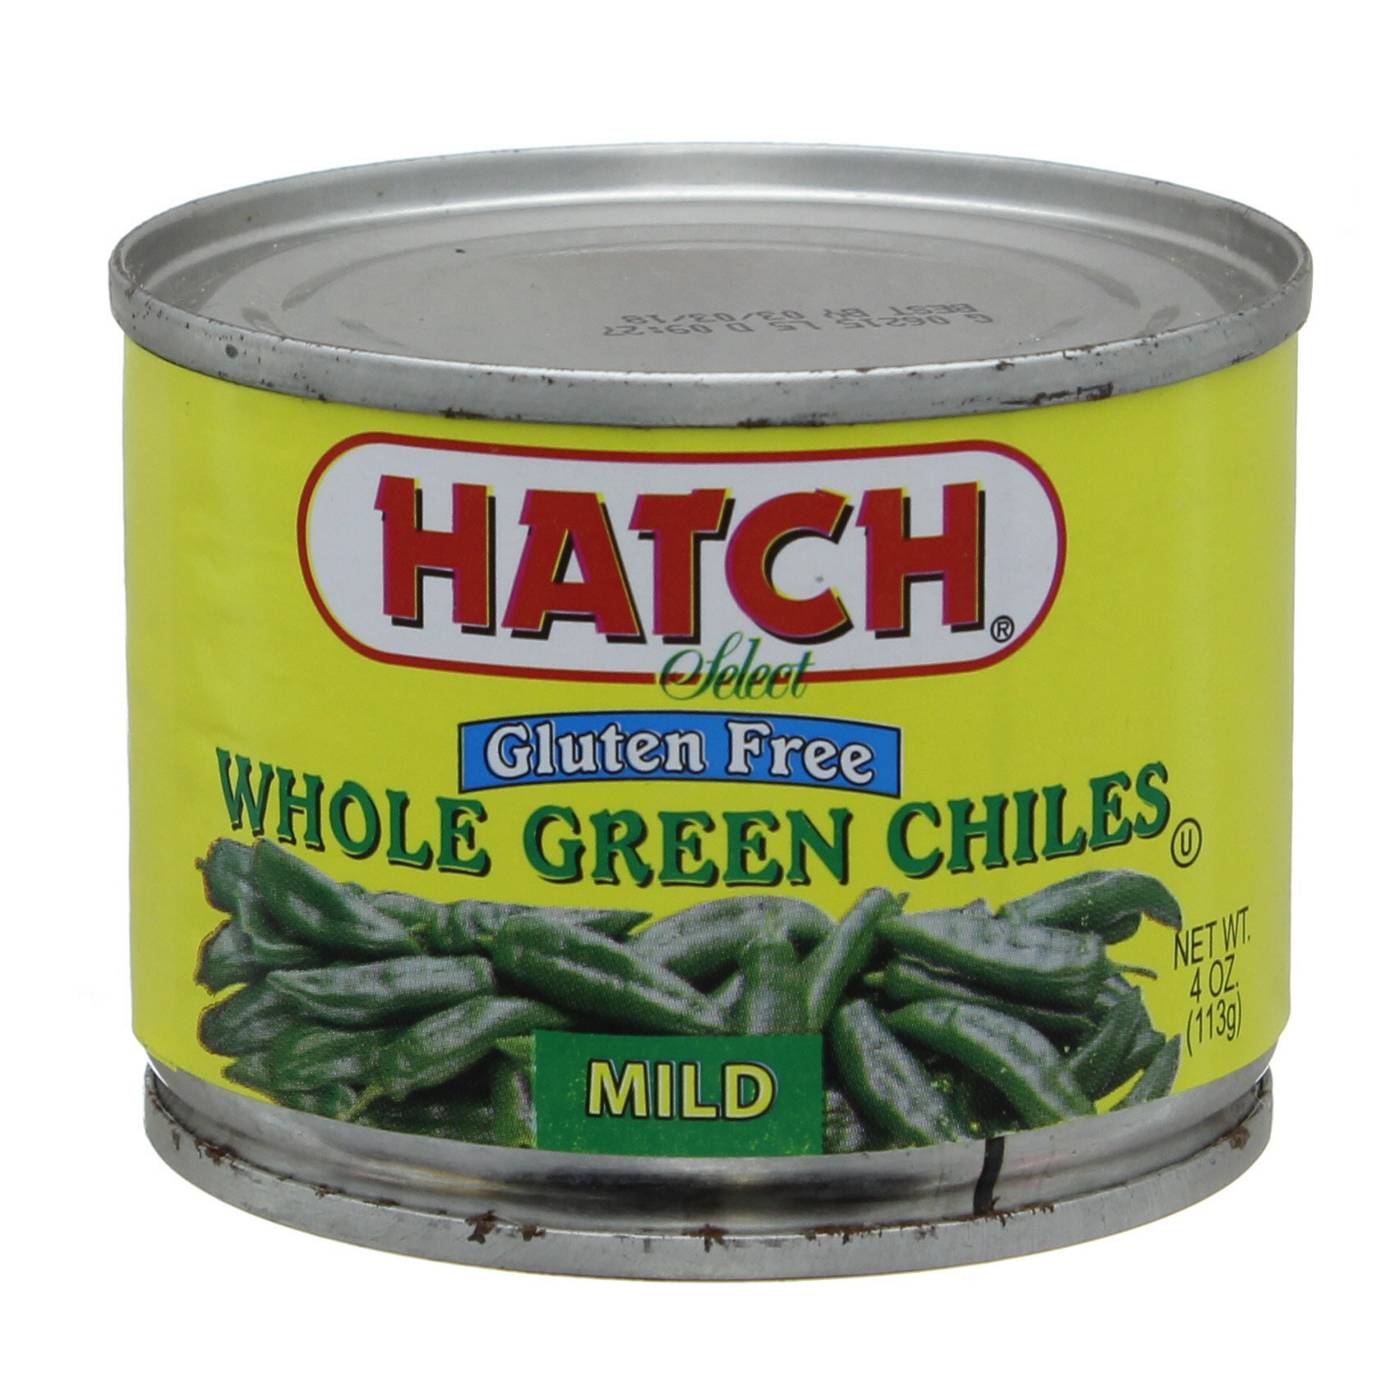 Hatch Fire Roasted Mild Whole Green Chiles; image 1 of 2